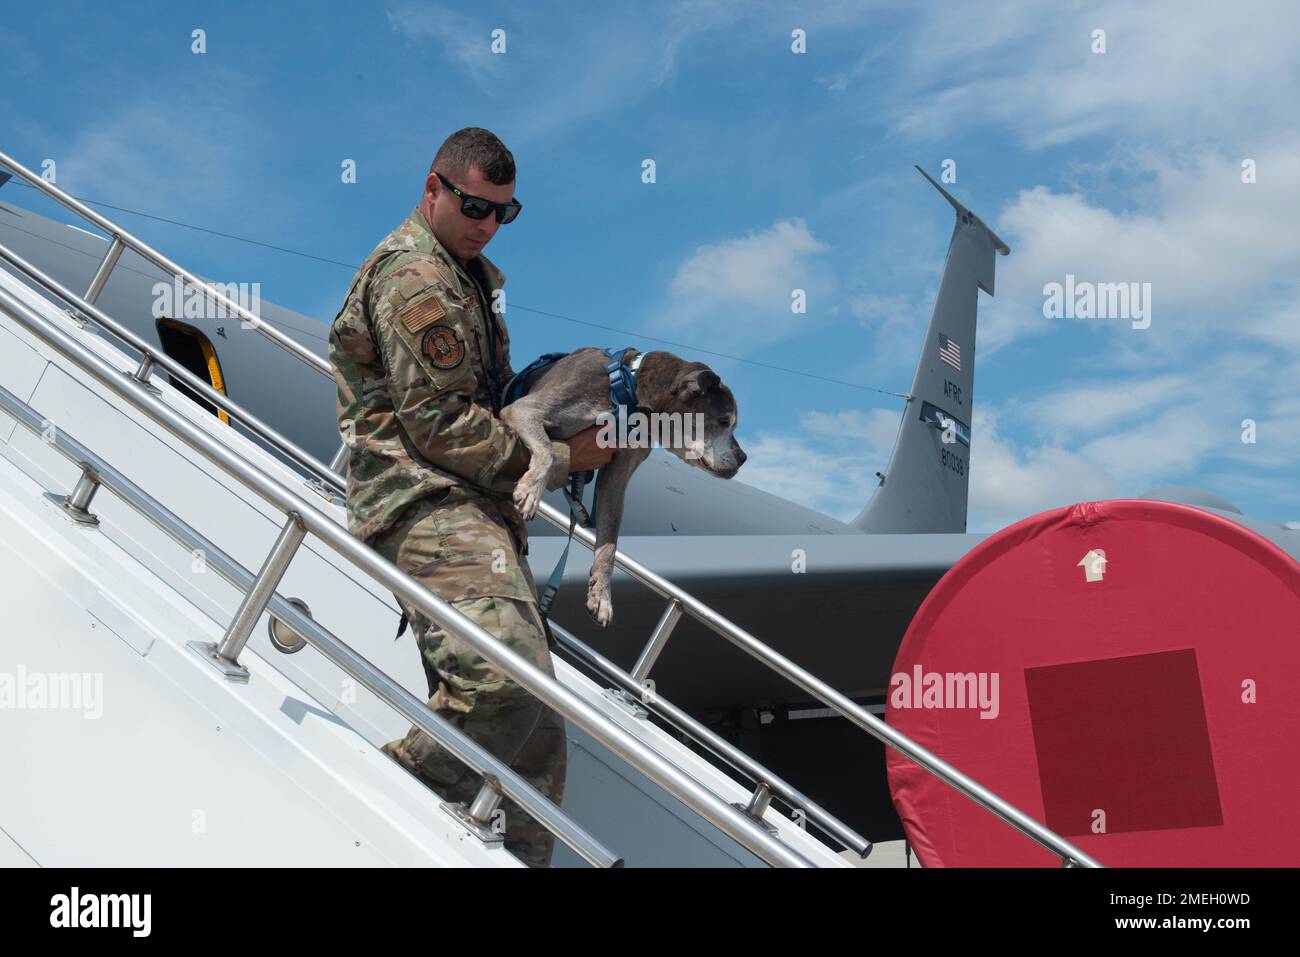 U.S. Air Force Tech. Sgt. Alexander Coppola, from the 914th Aircraft Maintenance Squadron, carries Lloyd the dog down the stairs from the KC-135 Stratotanker at Niagara Falls Air Reserve Station, New York, on Wednesday, Aug. 17, 2022. The 107th Attack Wing, Air National Guard, invited Lloyd to enjoy the day with Airmen as he battles the late stages of kidney failure. Stock Photo